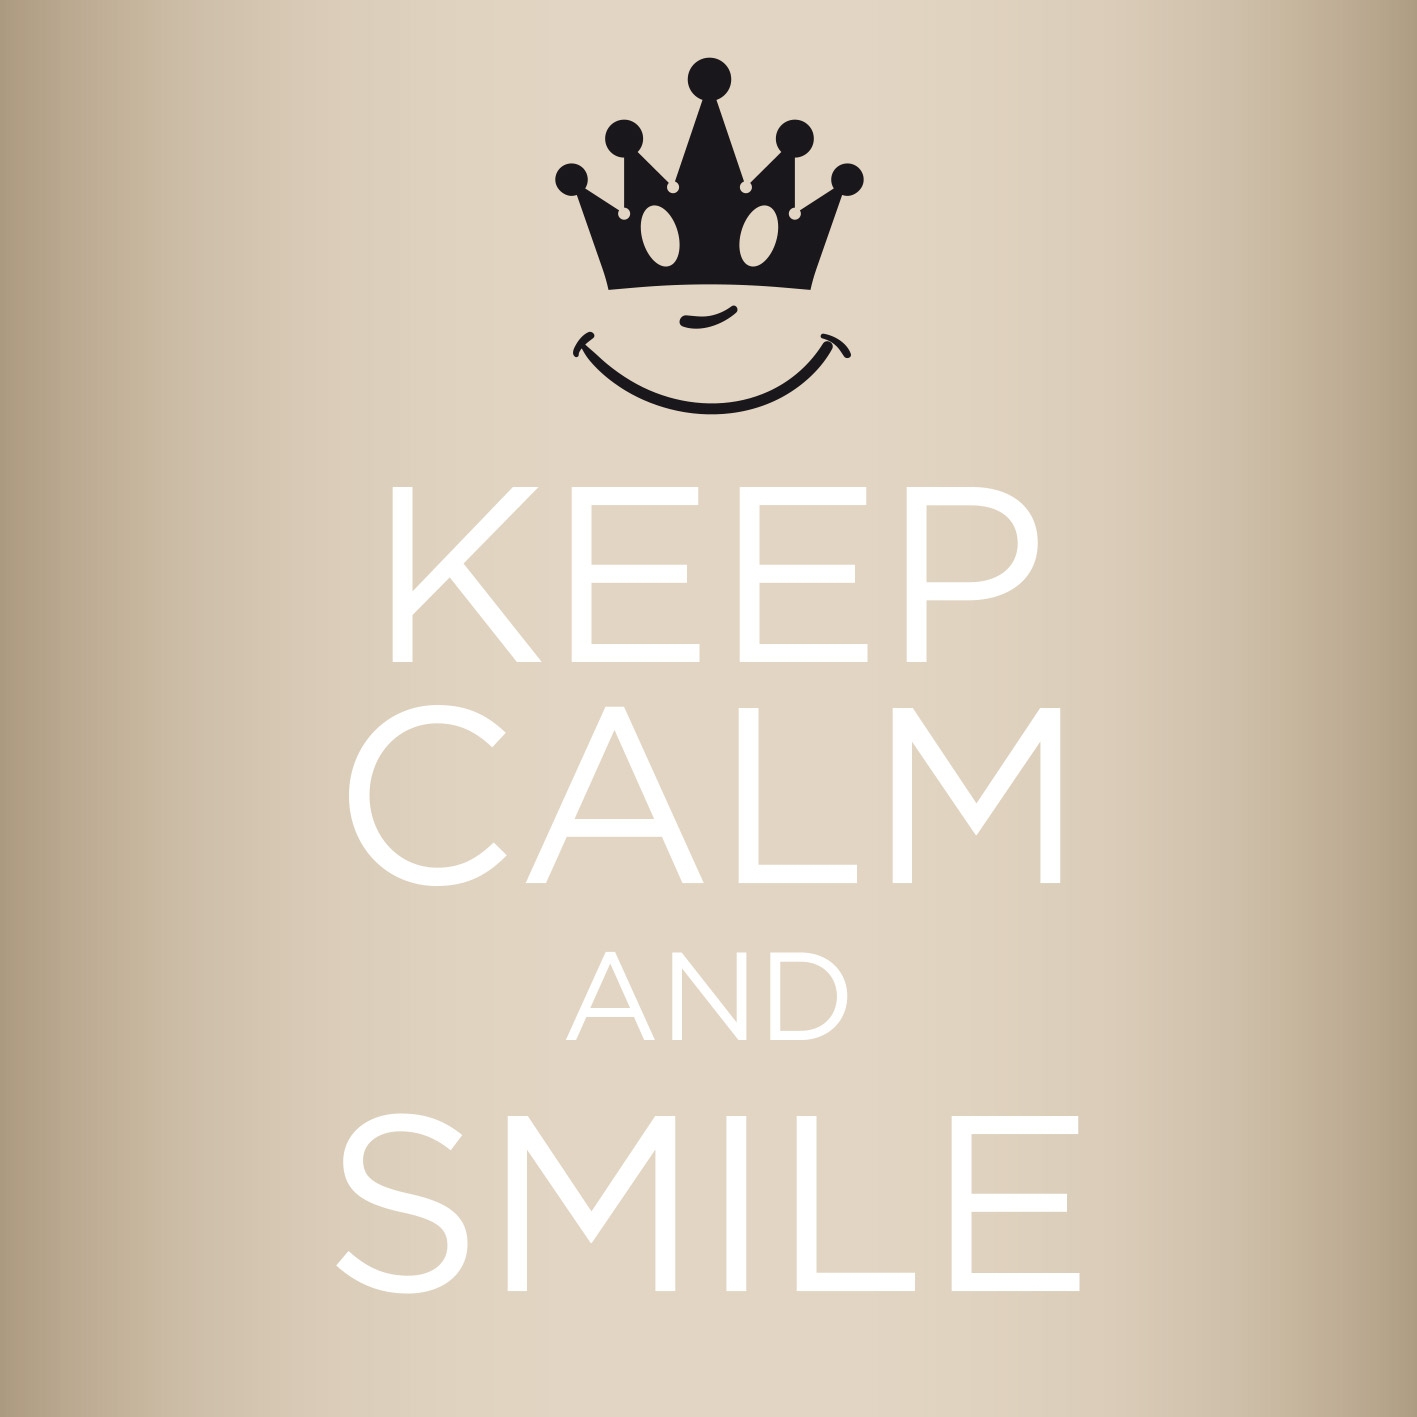 Keep calm and smile Duftsachet Suisse120x120